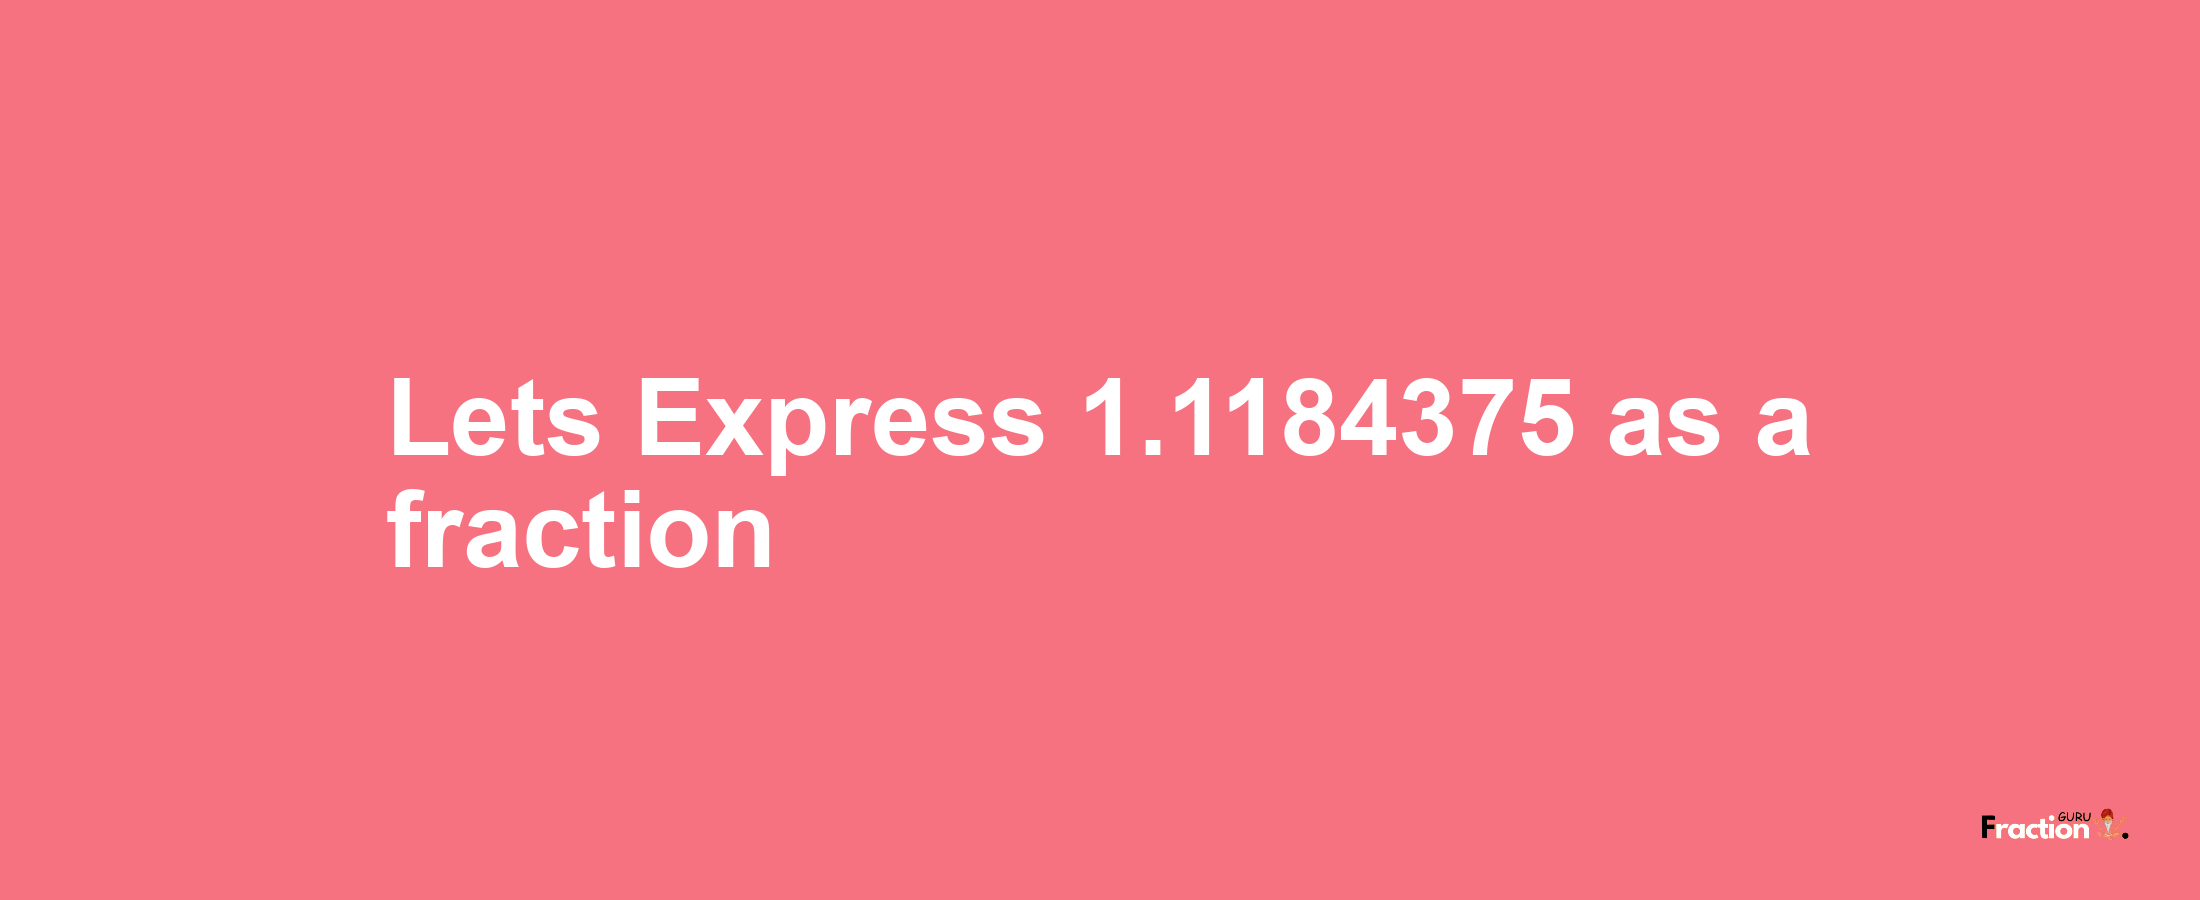 Lets Express 1.1184375 as afraction